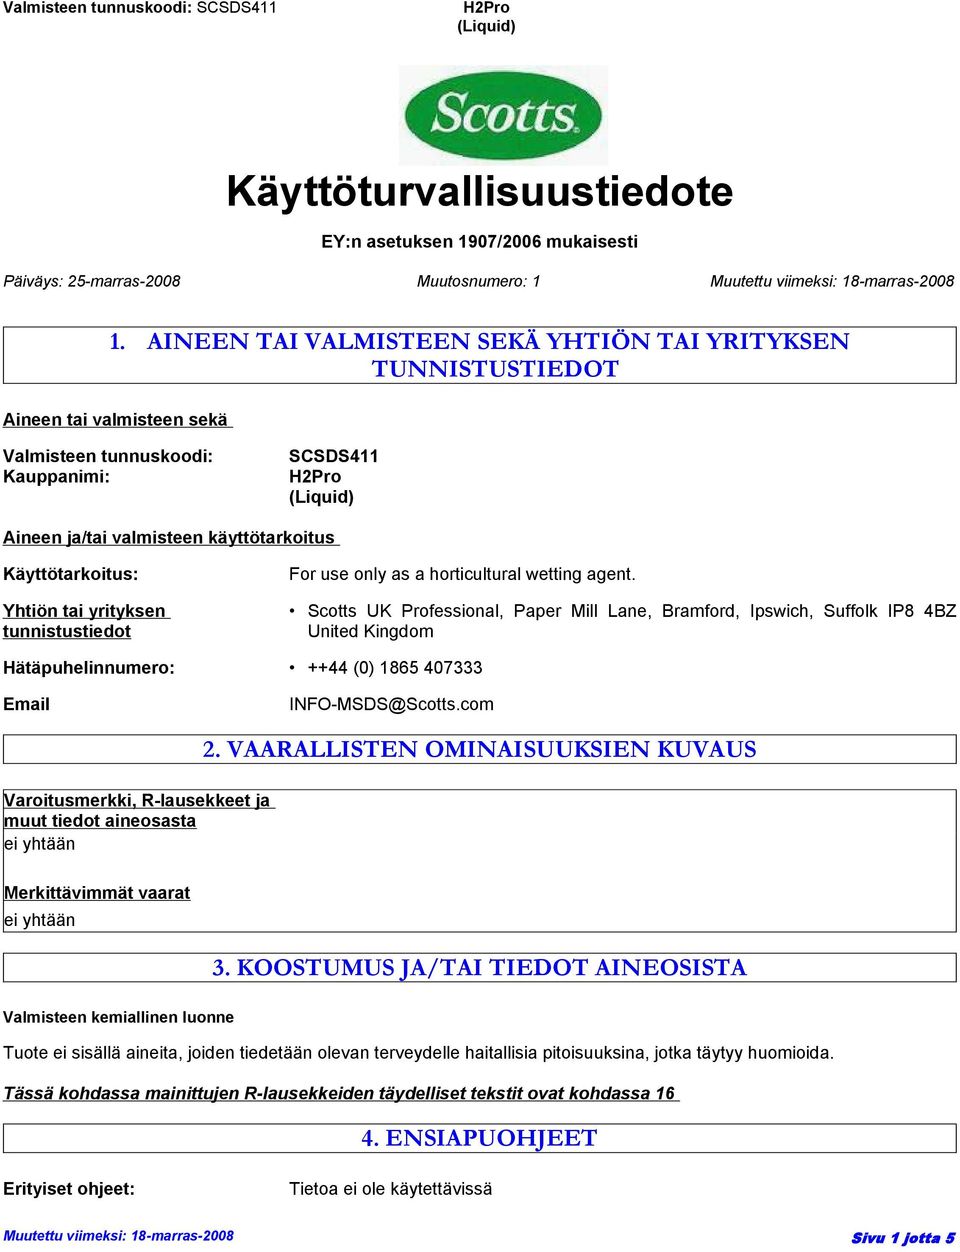 Yhtiön tai yrityksen tunnistustiedot For use only as a horticultural wetting agent.